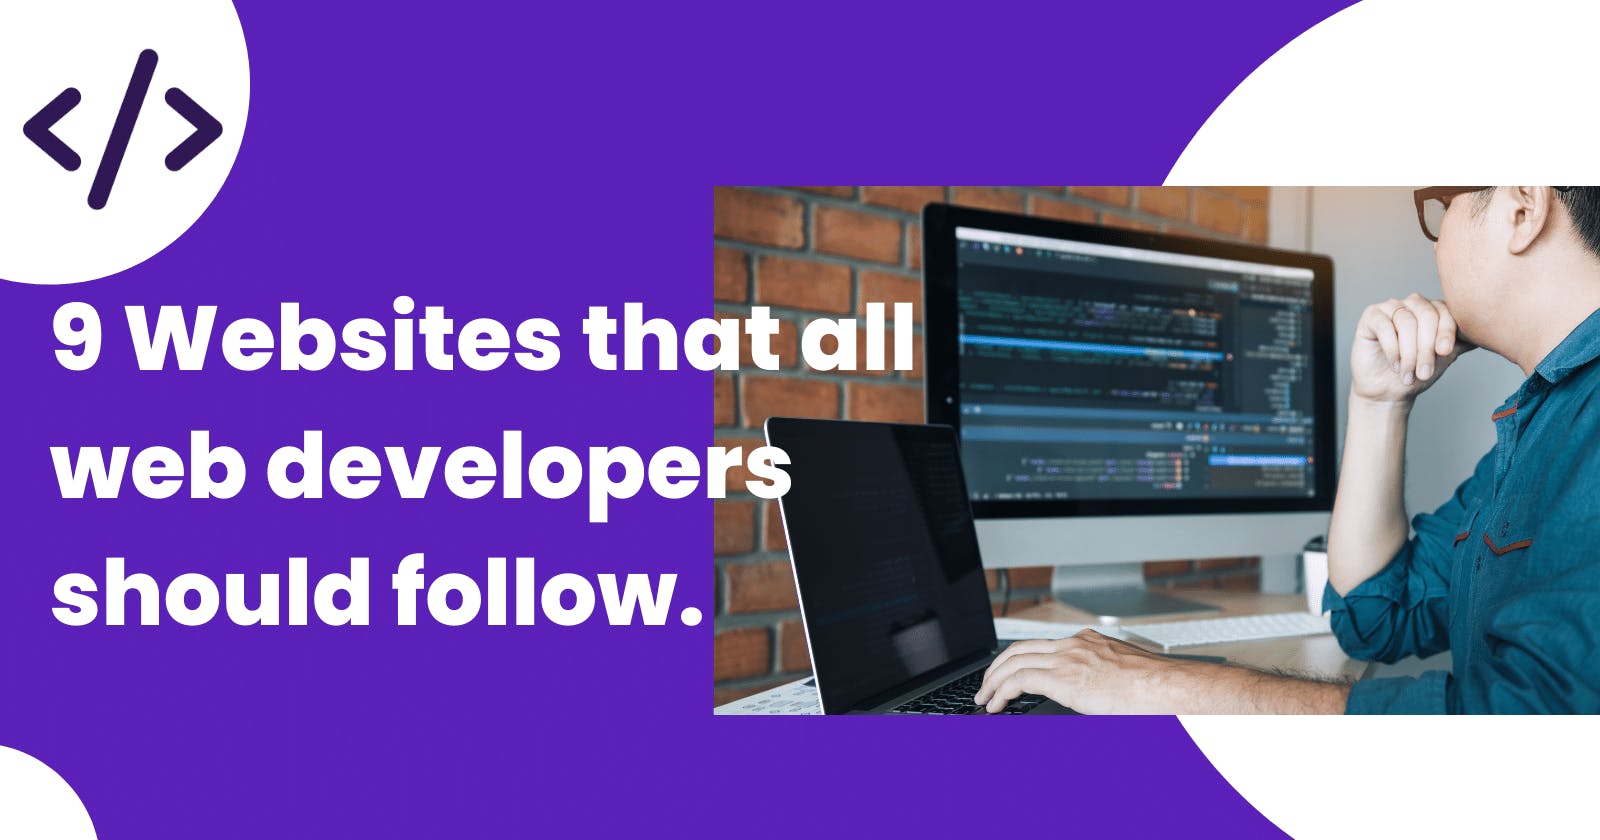 9 Websites that all web developers should follow.